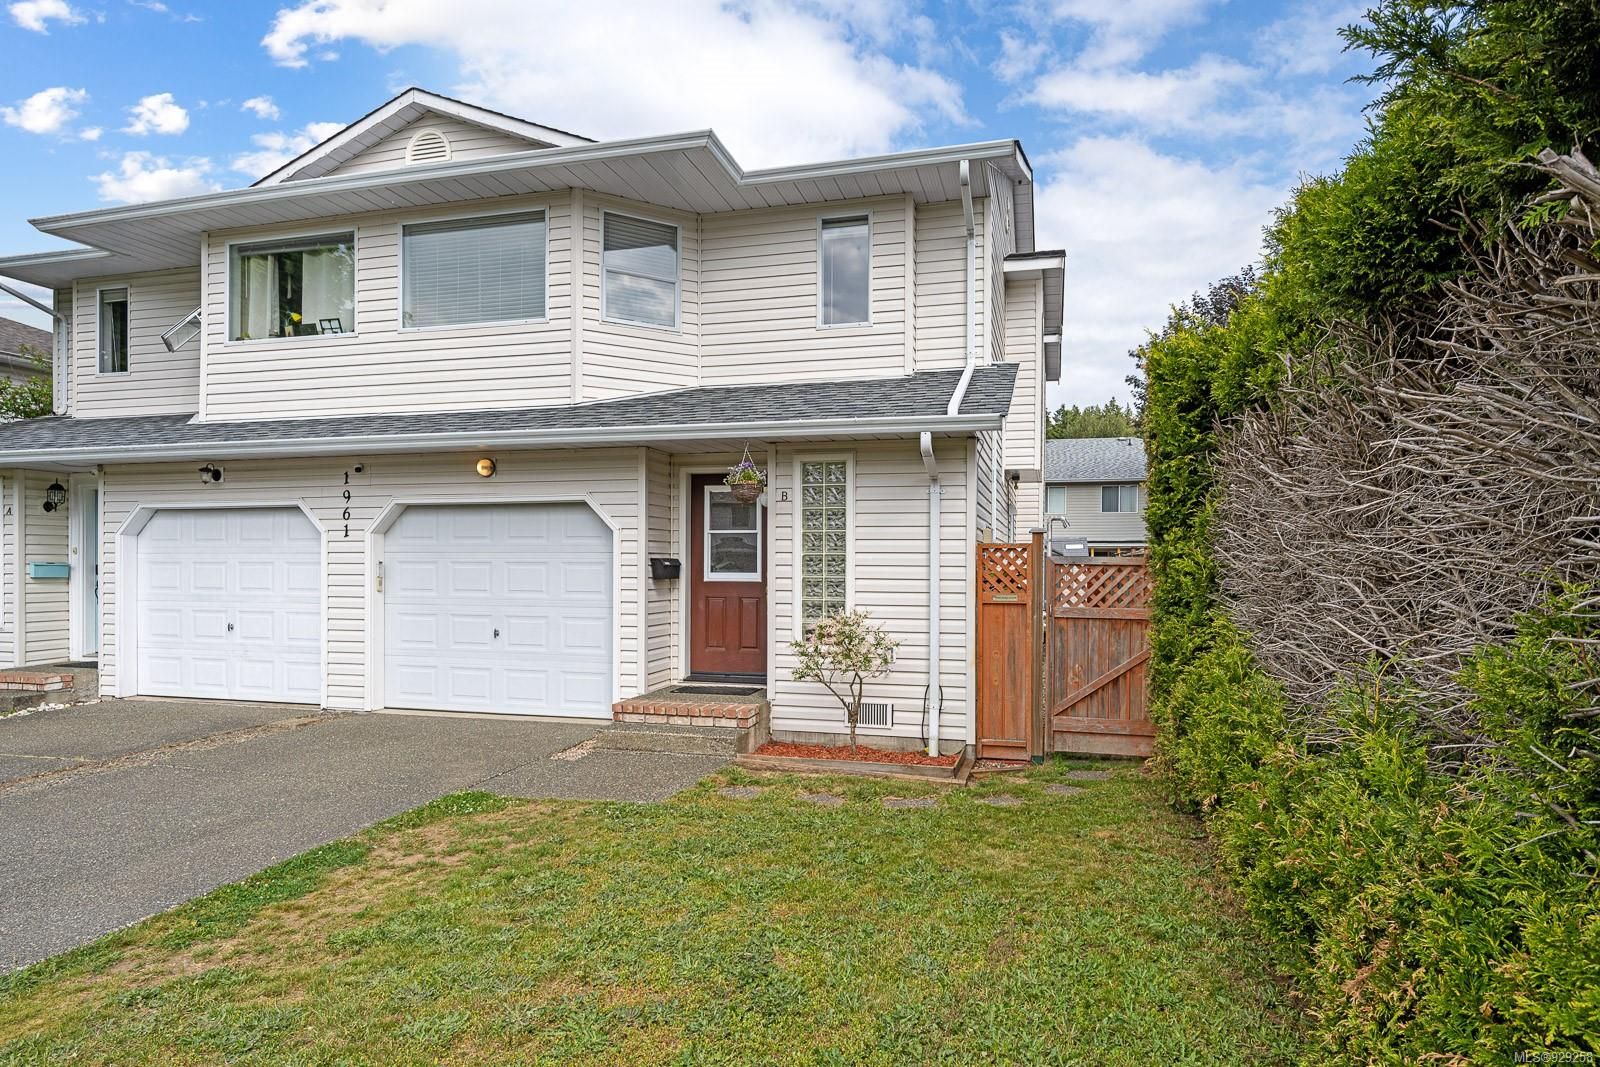 New property listed in CV Courtenay City, Comox Valley